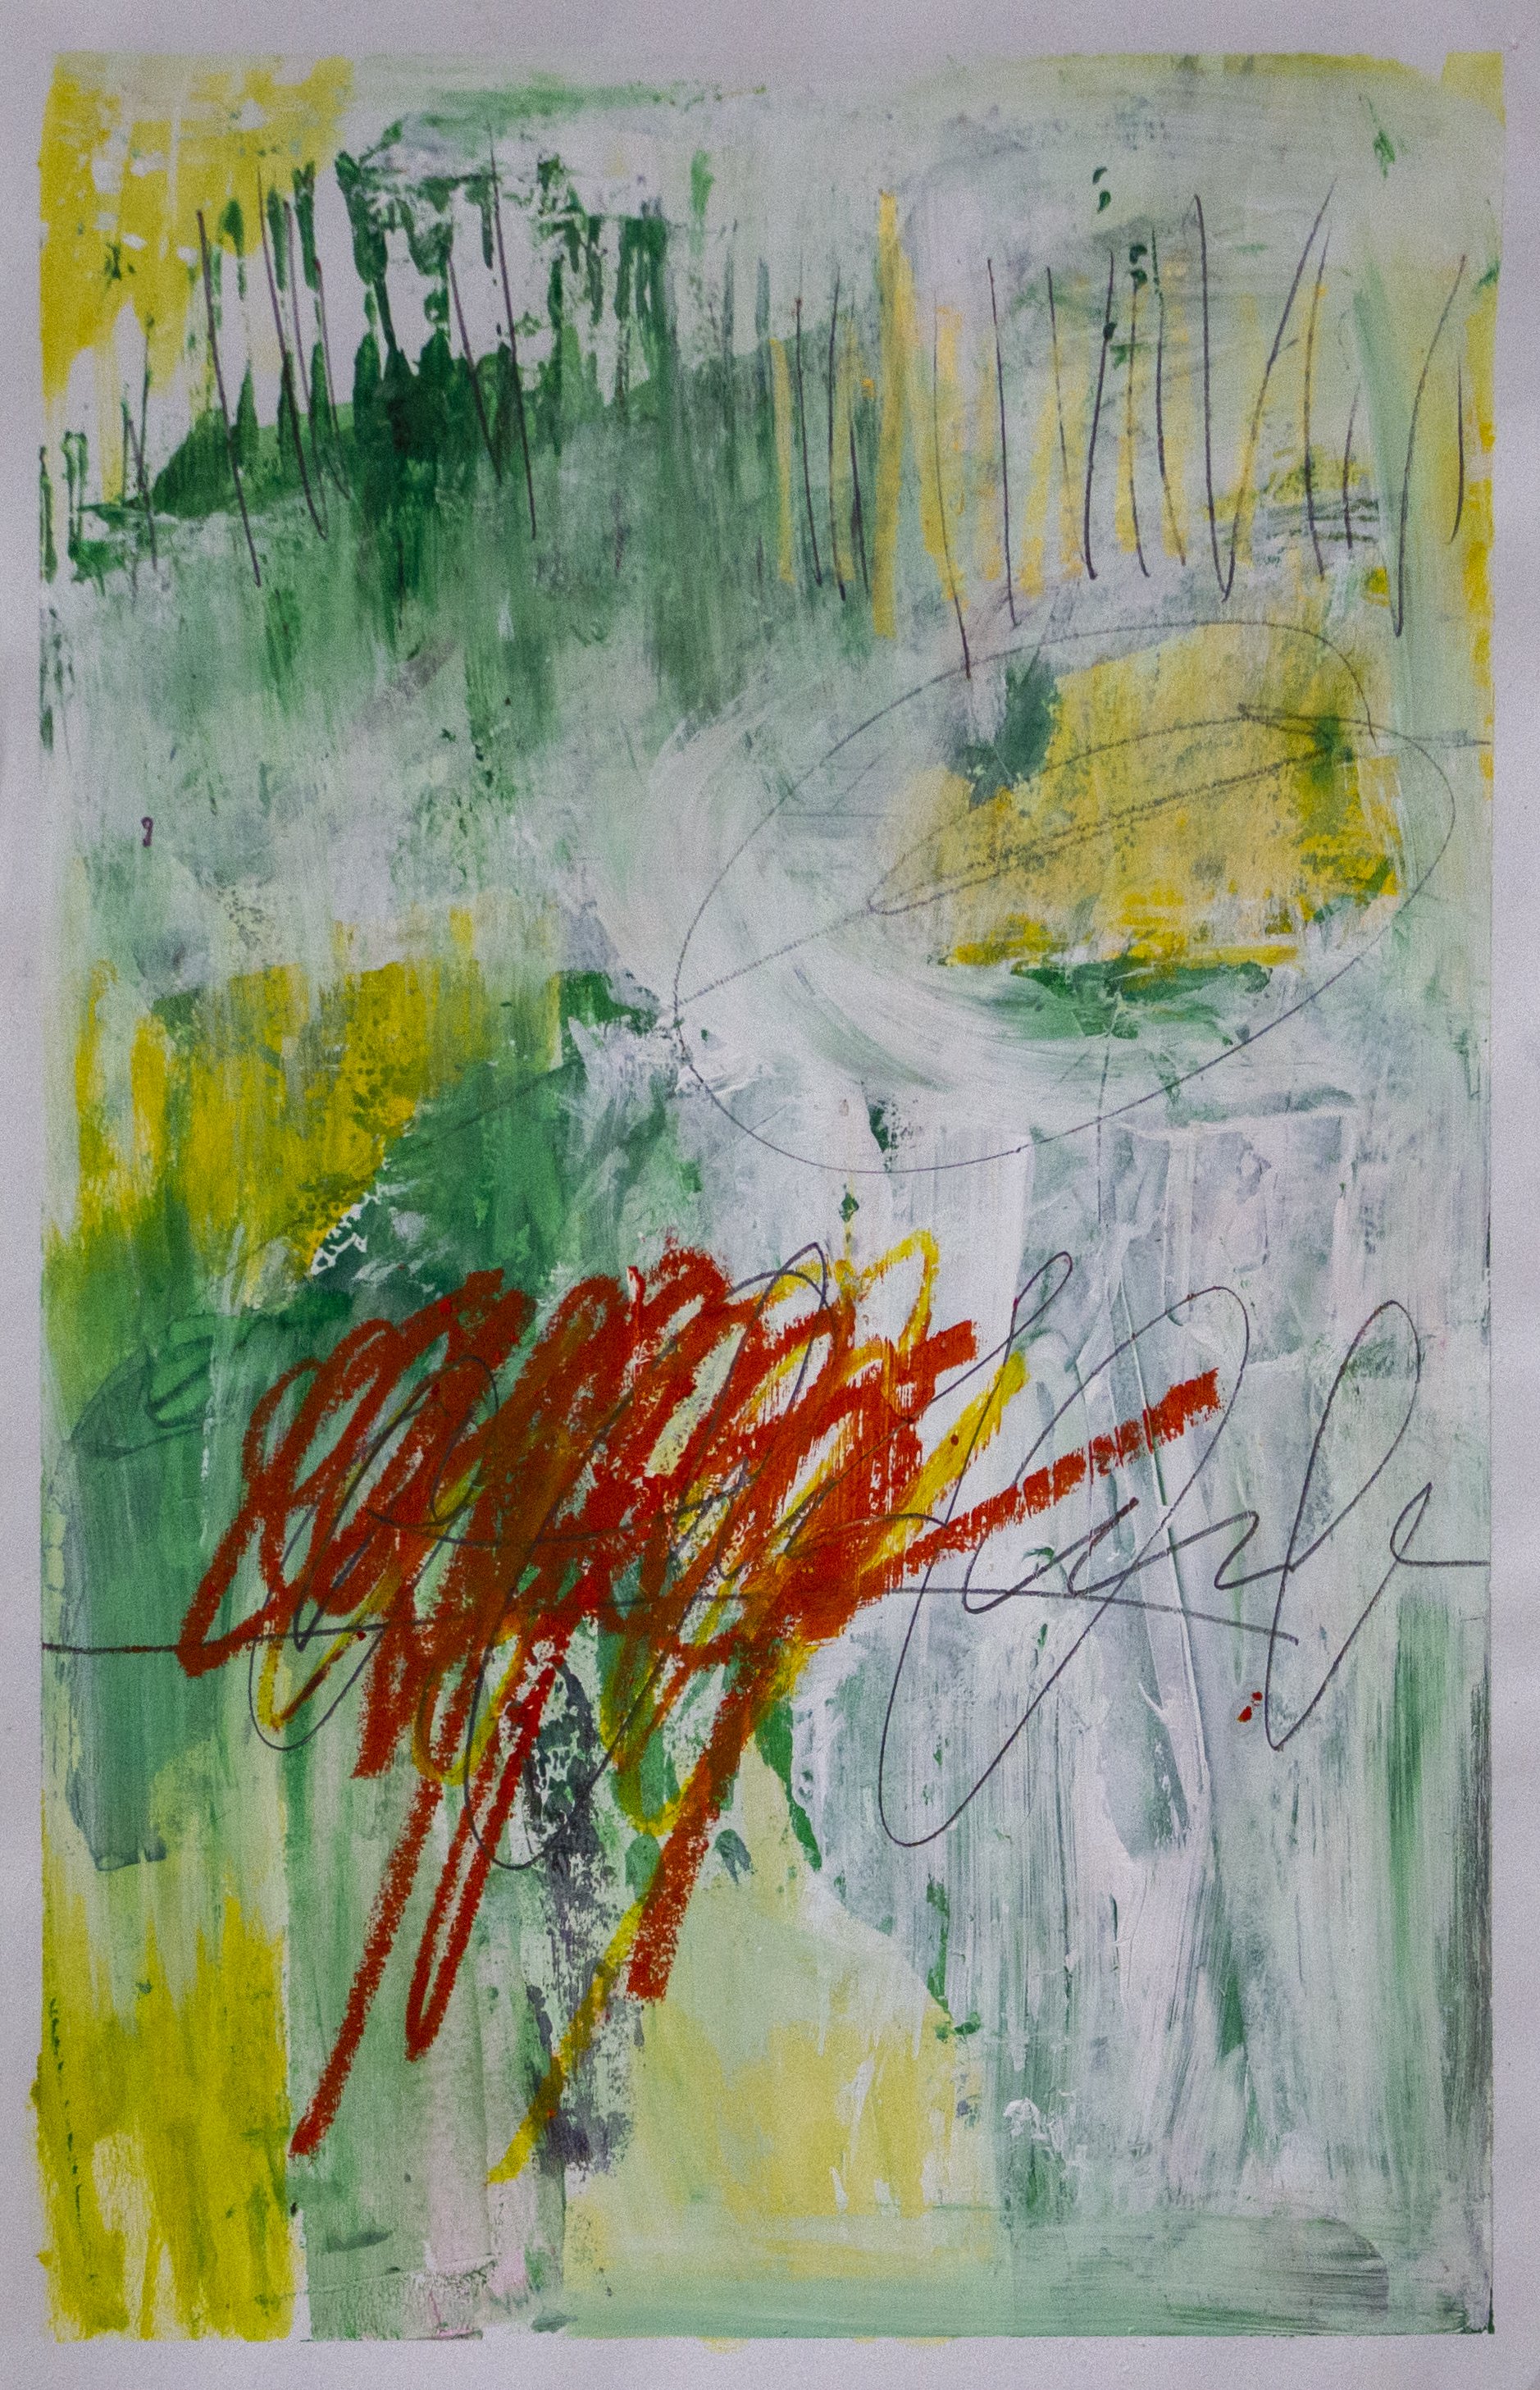   Garder au Chaud , 2021  11 x 17 inches  Acrylic, Crayon, Pastel and Pencil on Paper 